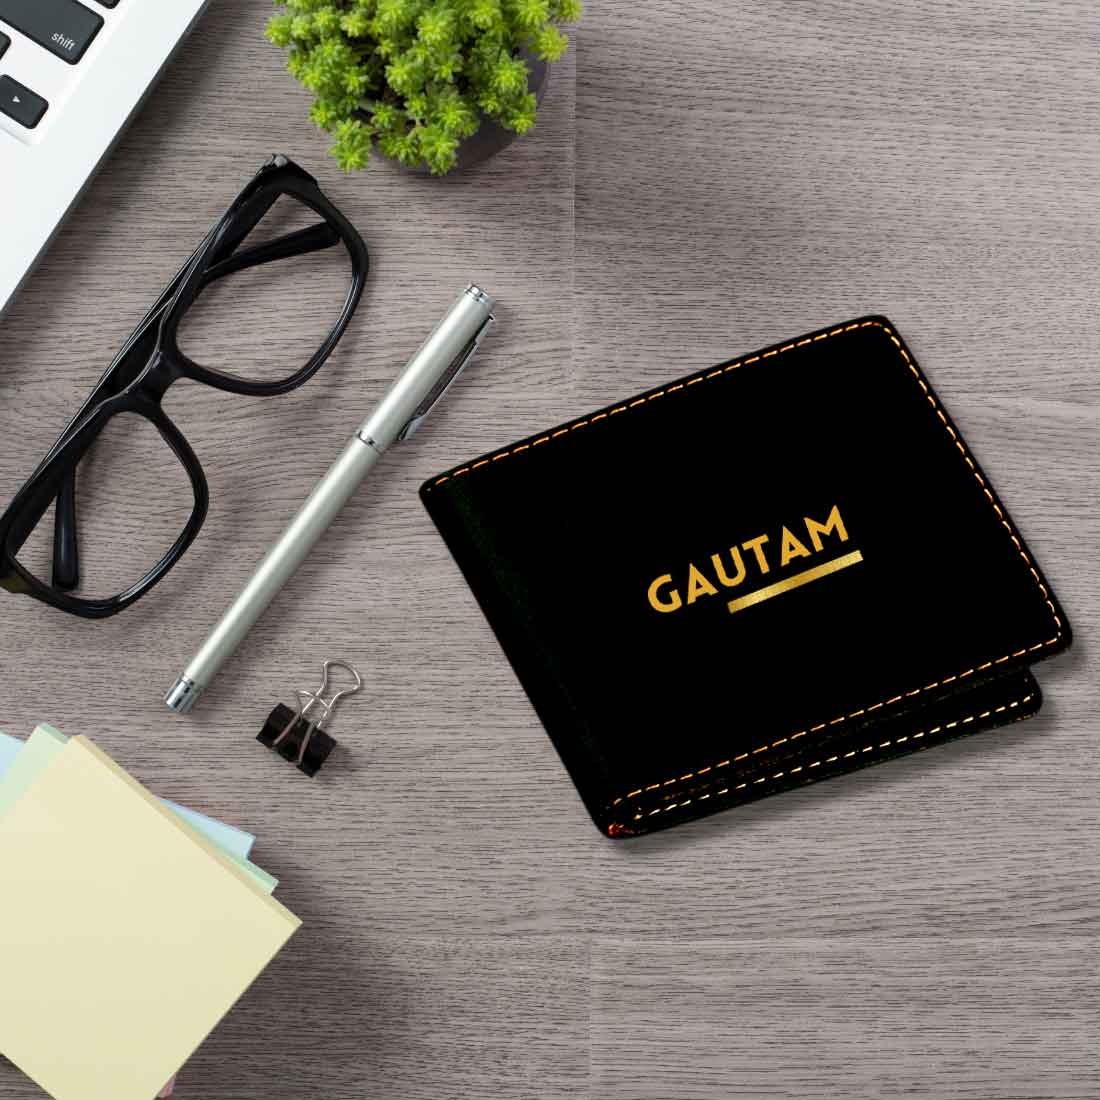 Buy Personalized Wallet Men With Name Gents Purse Online – Nutcase